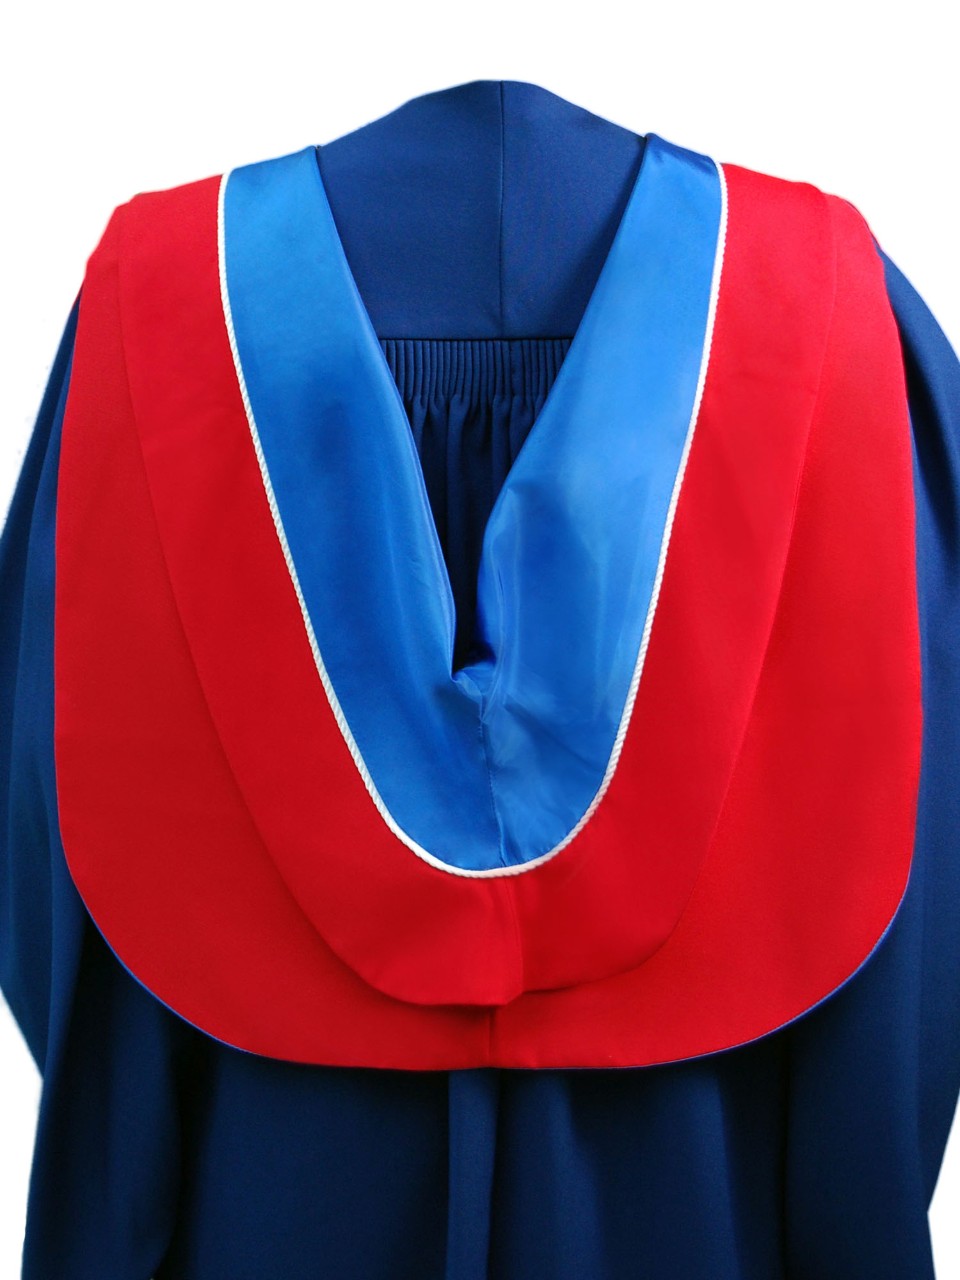 The Master of Public Policy hood is red with blue underside and white cording. 